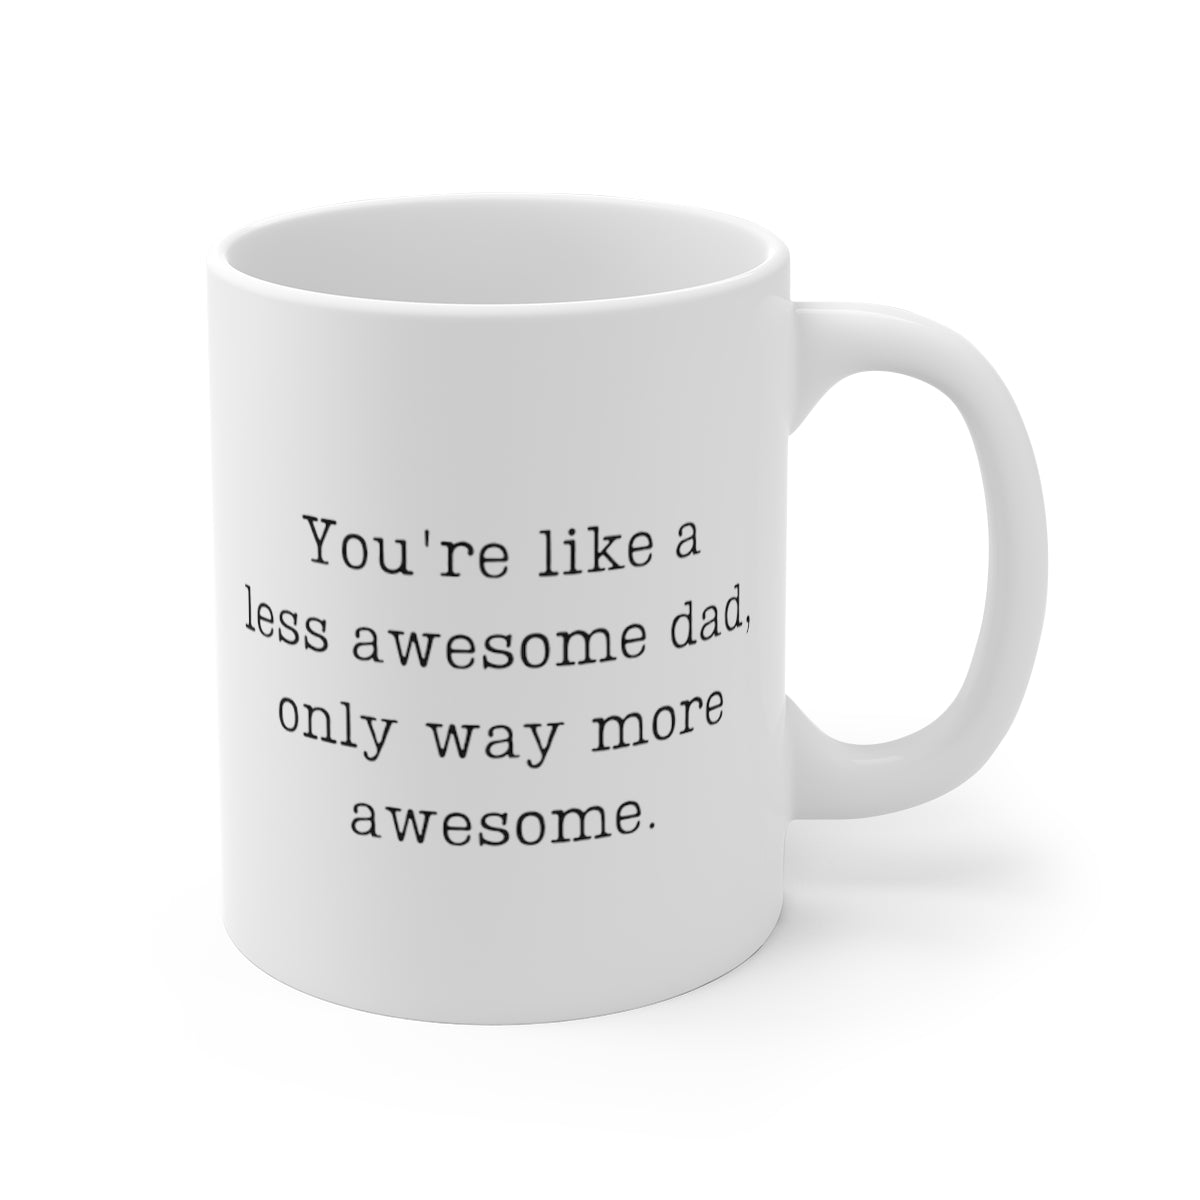 You're Like A Less Awesome Dad, Only Way More Awesome | Funny, Snarky Gift | White Ceramic Mug, Typewriter Font